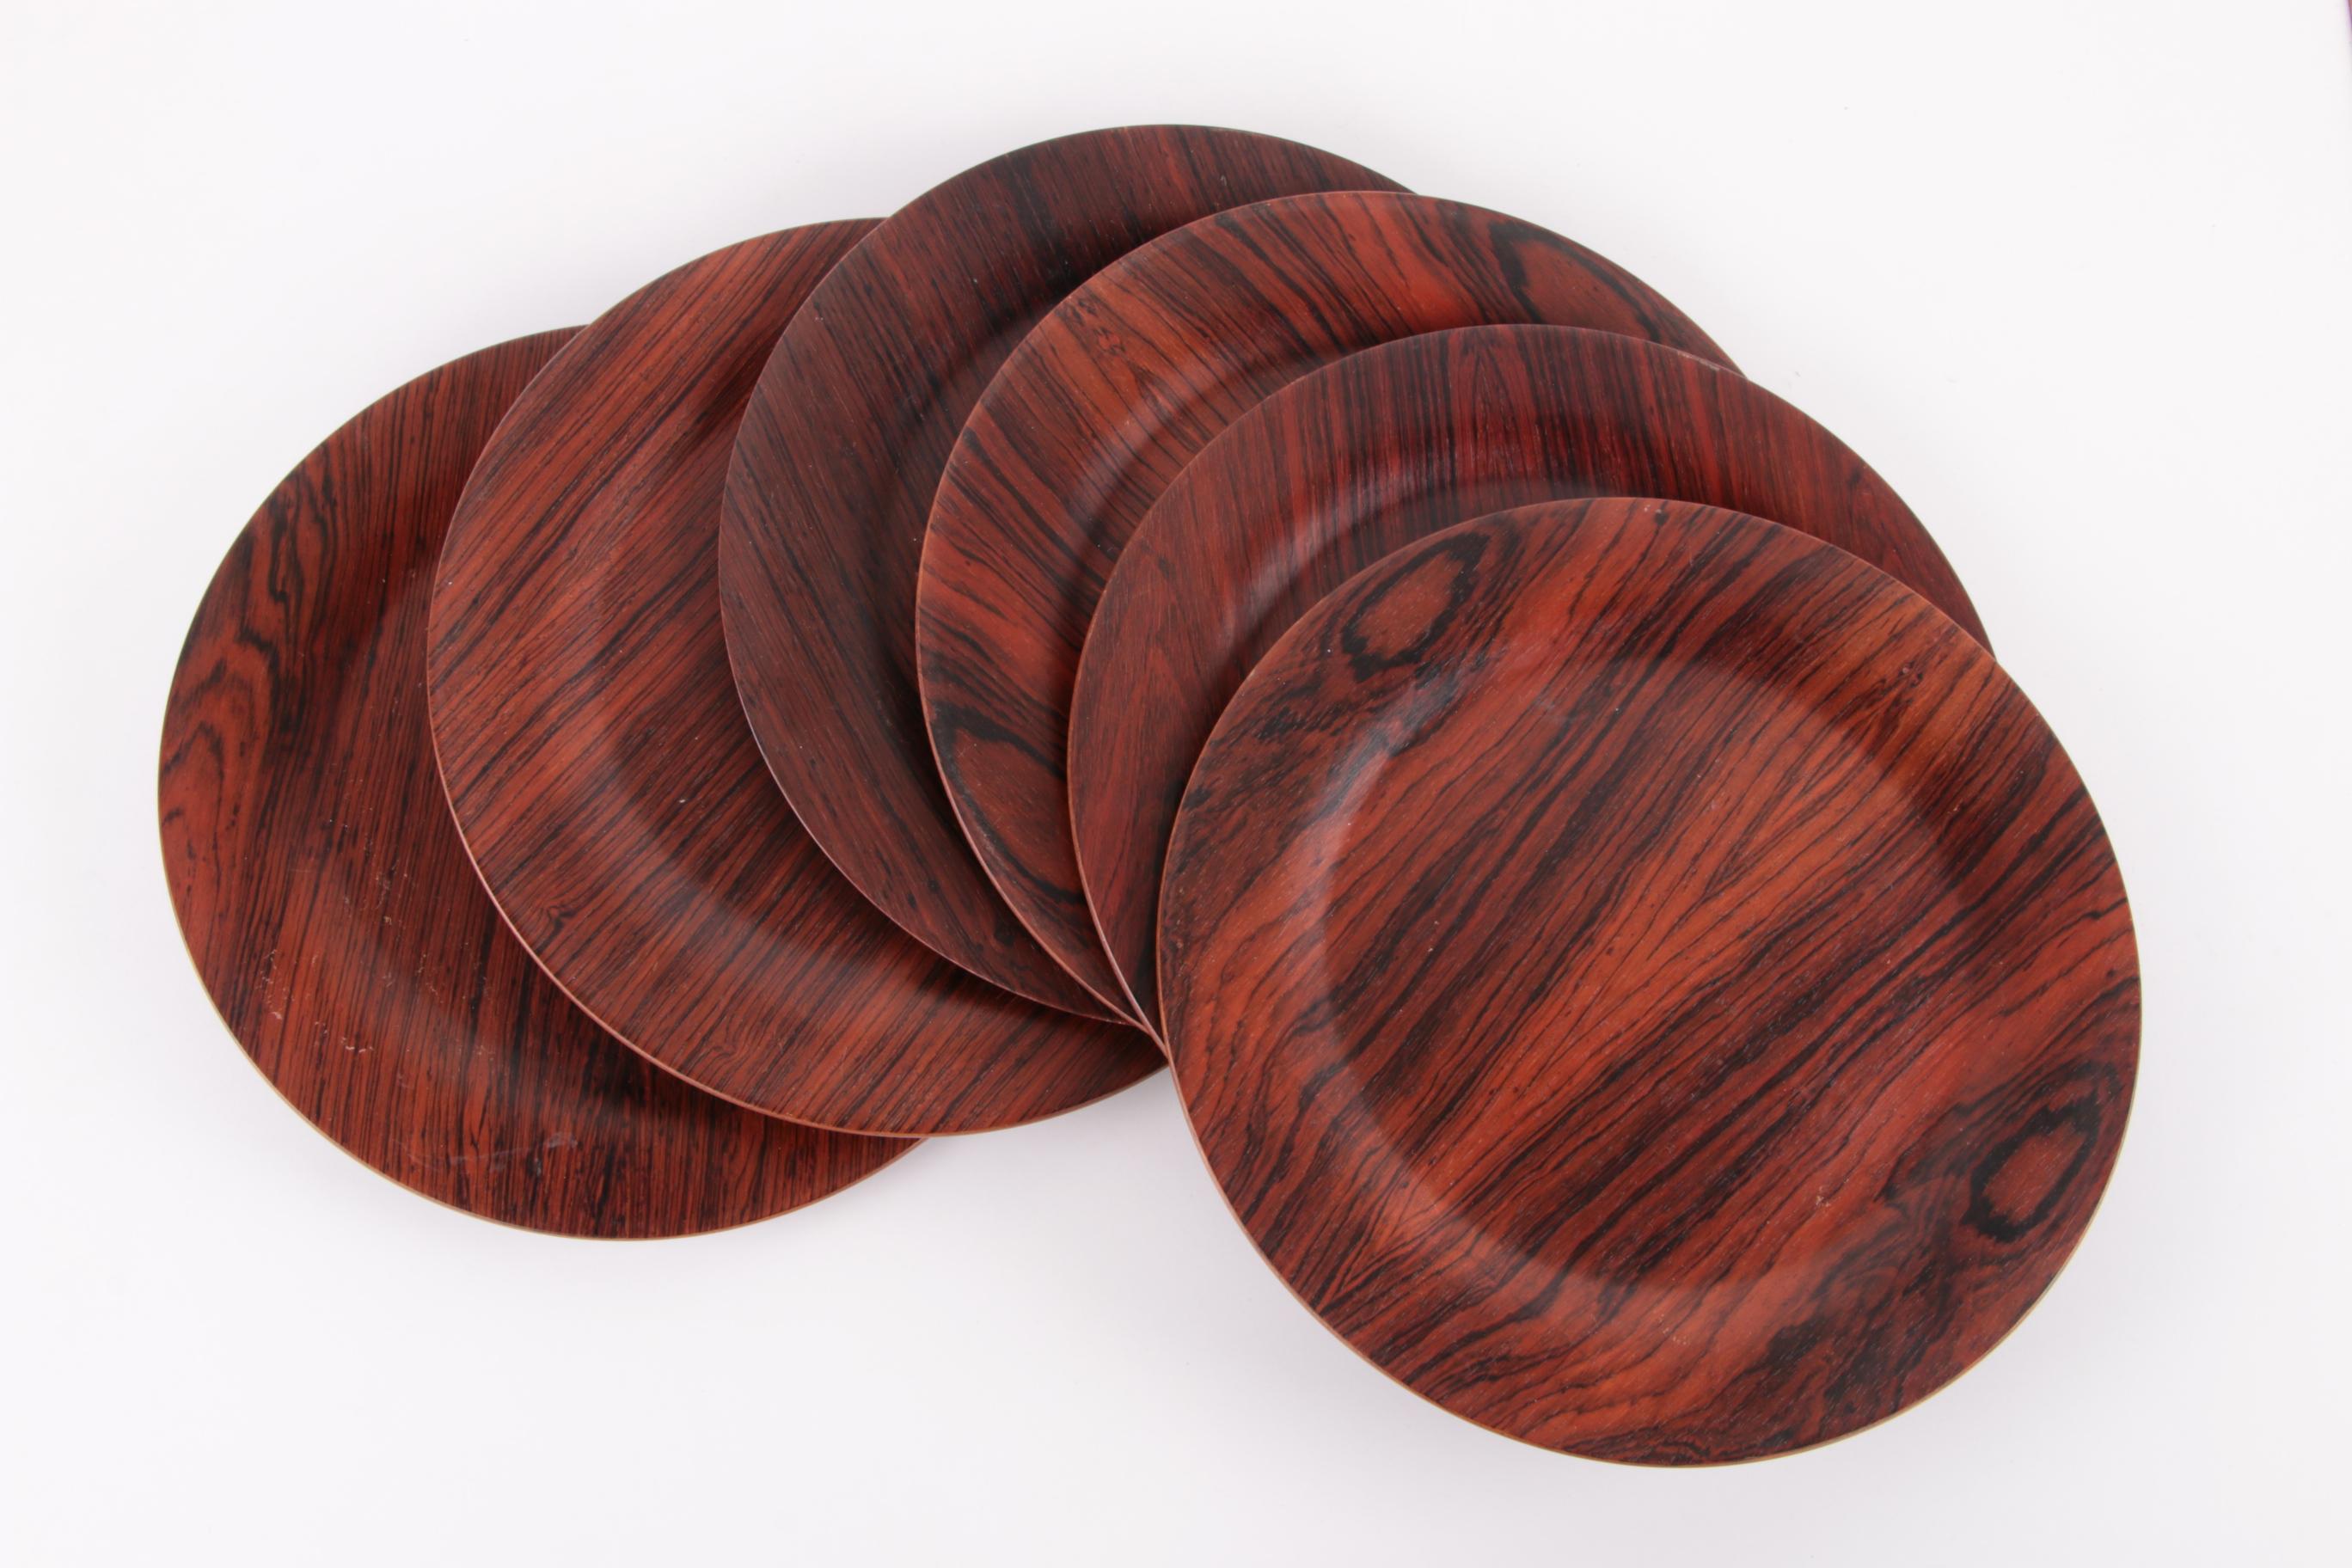 Vintage Danish Design darkwood plates Set of 6 1960s


This is a beautiful set of 6 wooden bottom plates.

Made in Denmark in the 1960s.

Beautiful wavy movements over these beautiful plates.

Elegant and chic wooden signs are something